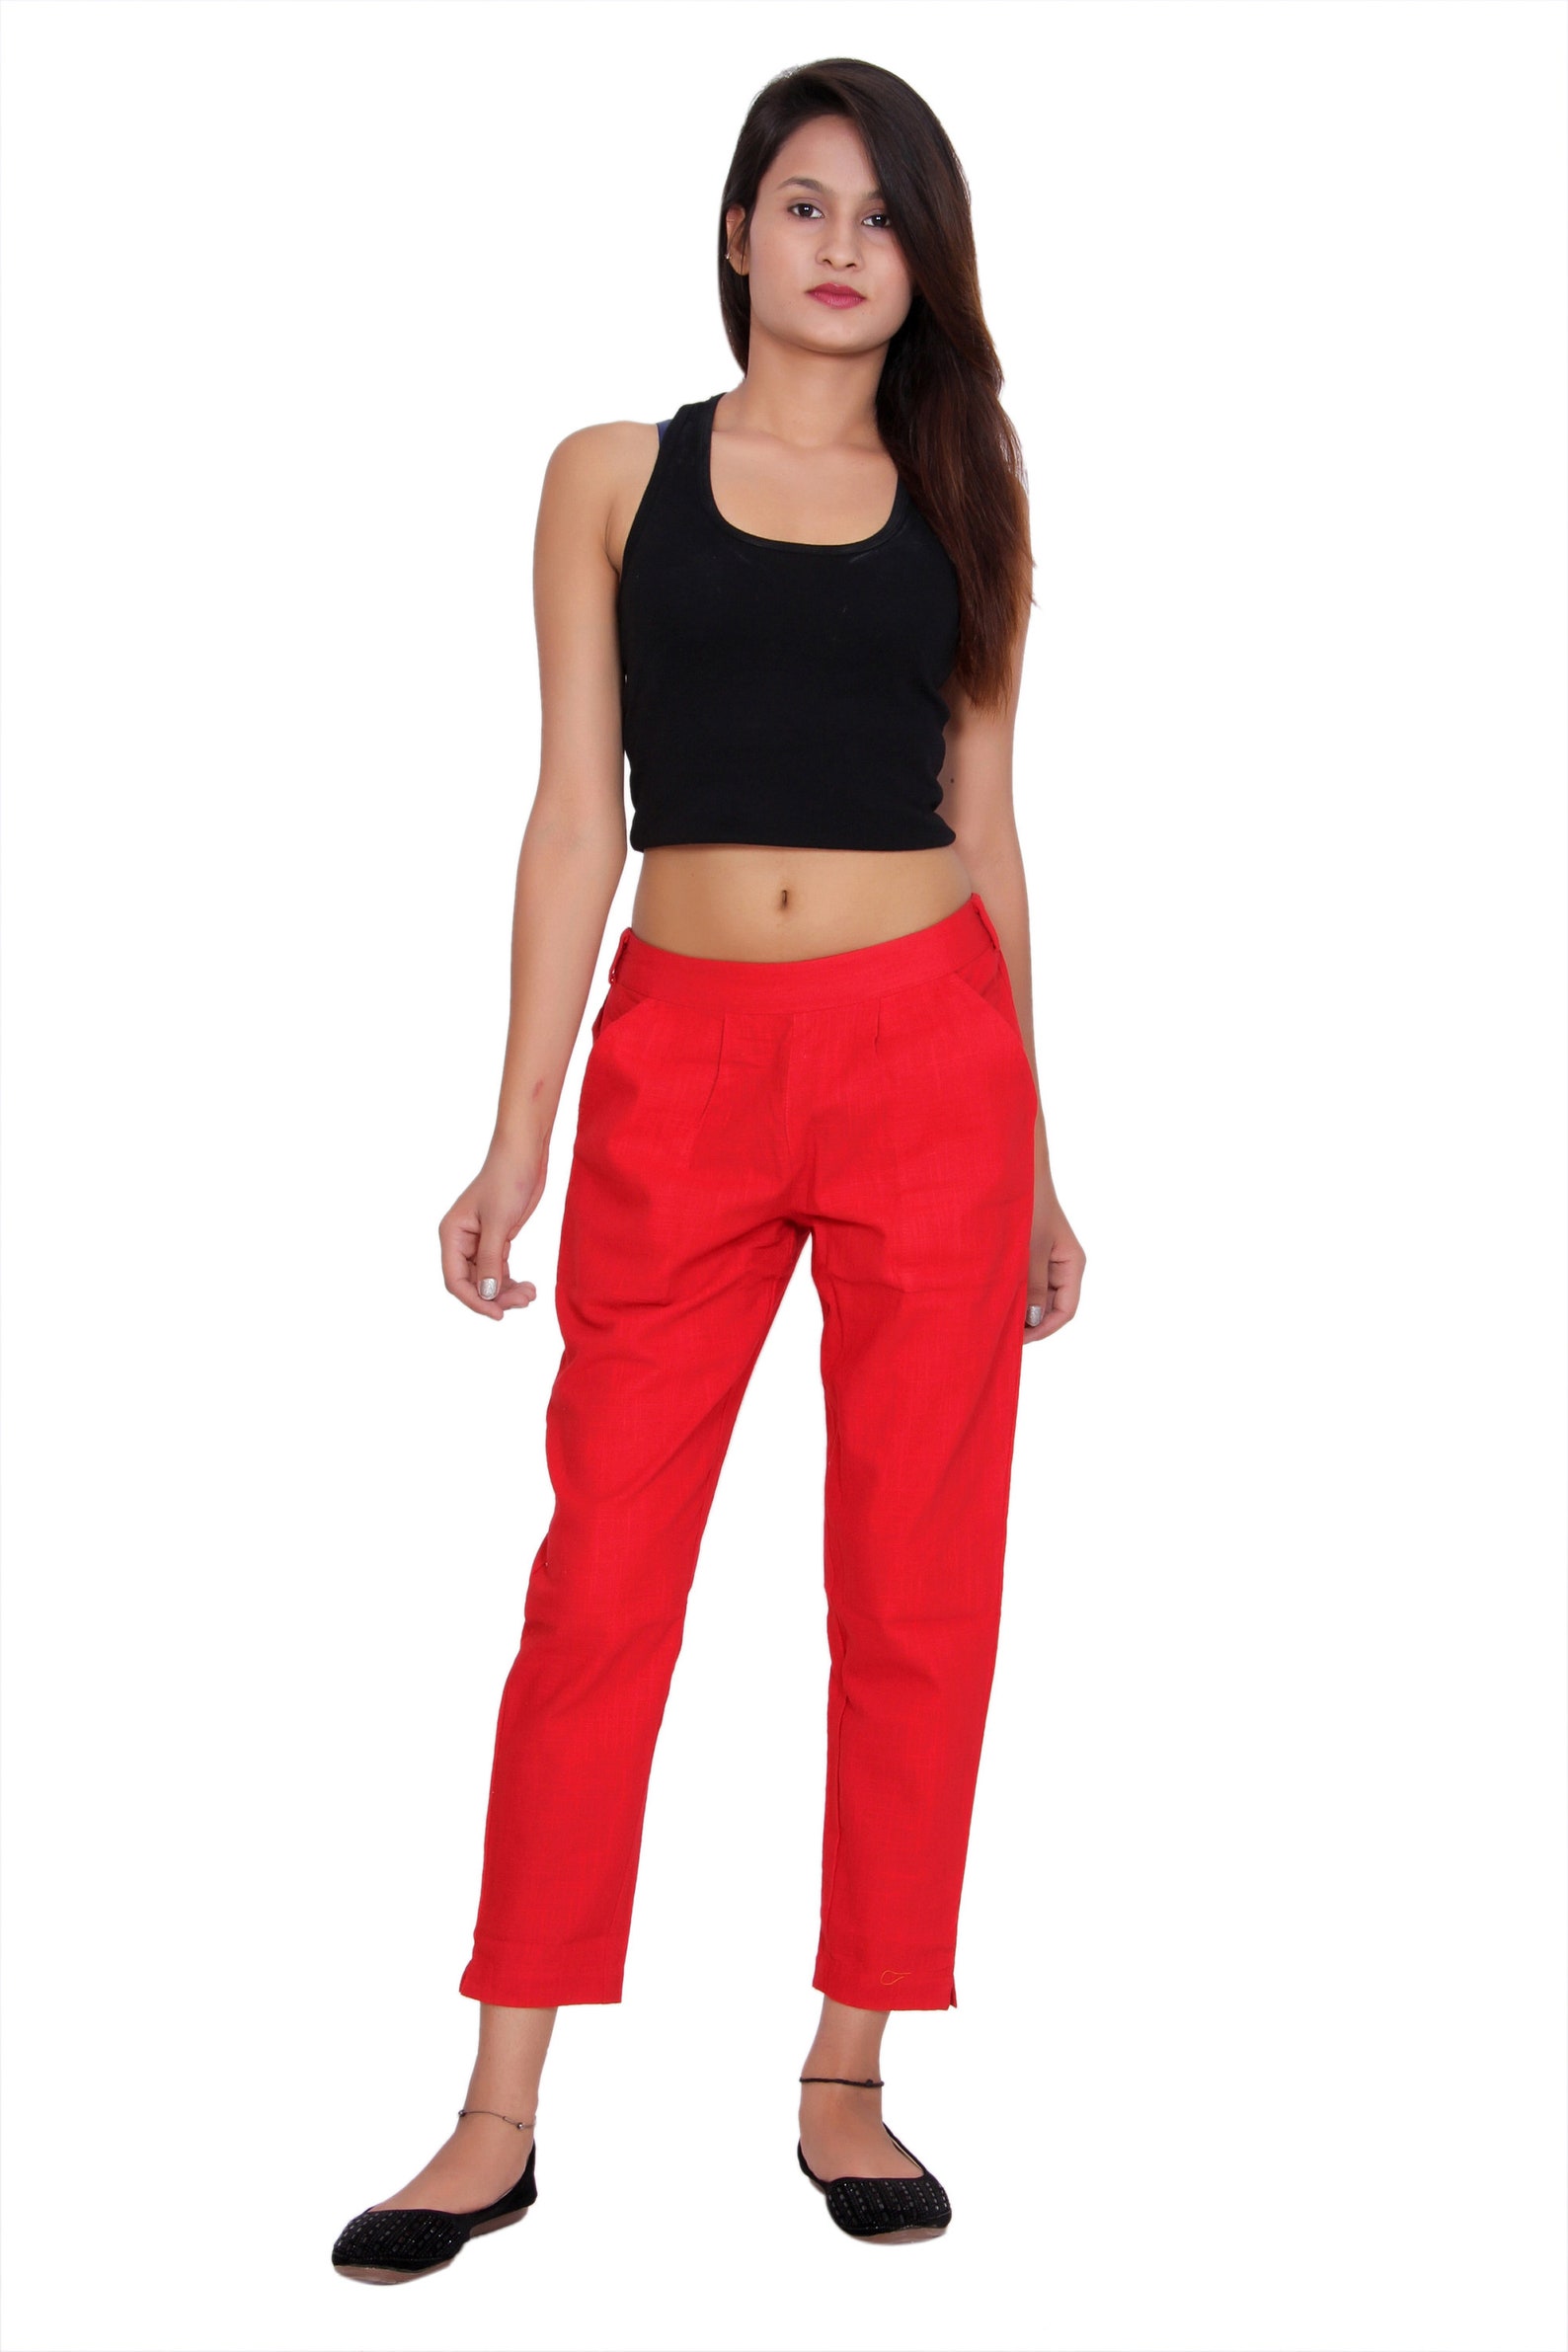 100% Cotton Women's Wear Trousers Red Casual Pants ankle - Etsy